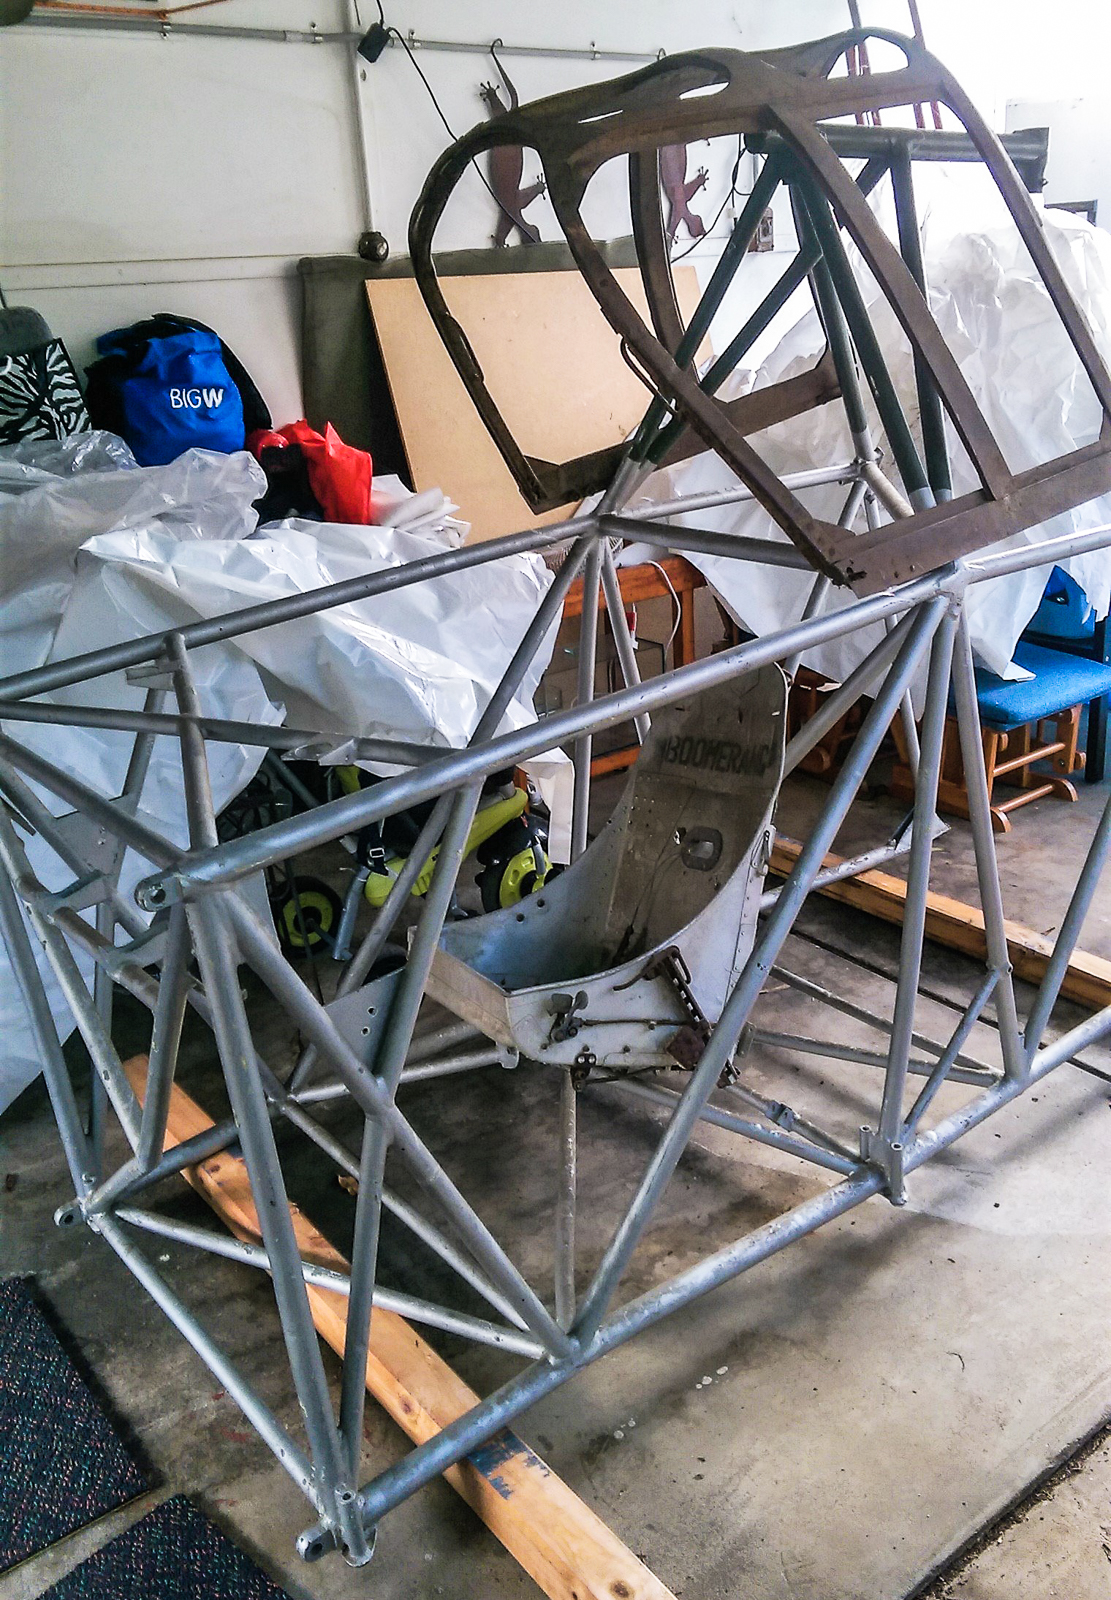 The statically restored fuselage frame for A46-3 sitting in Rick Anderson's garage. Note the unrestored cockpit canopy and pilot's seat in the image. (photo by Rick Anderson)